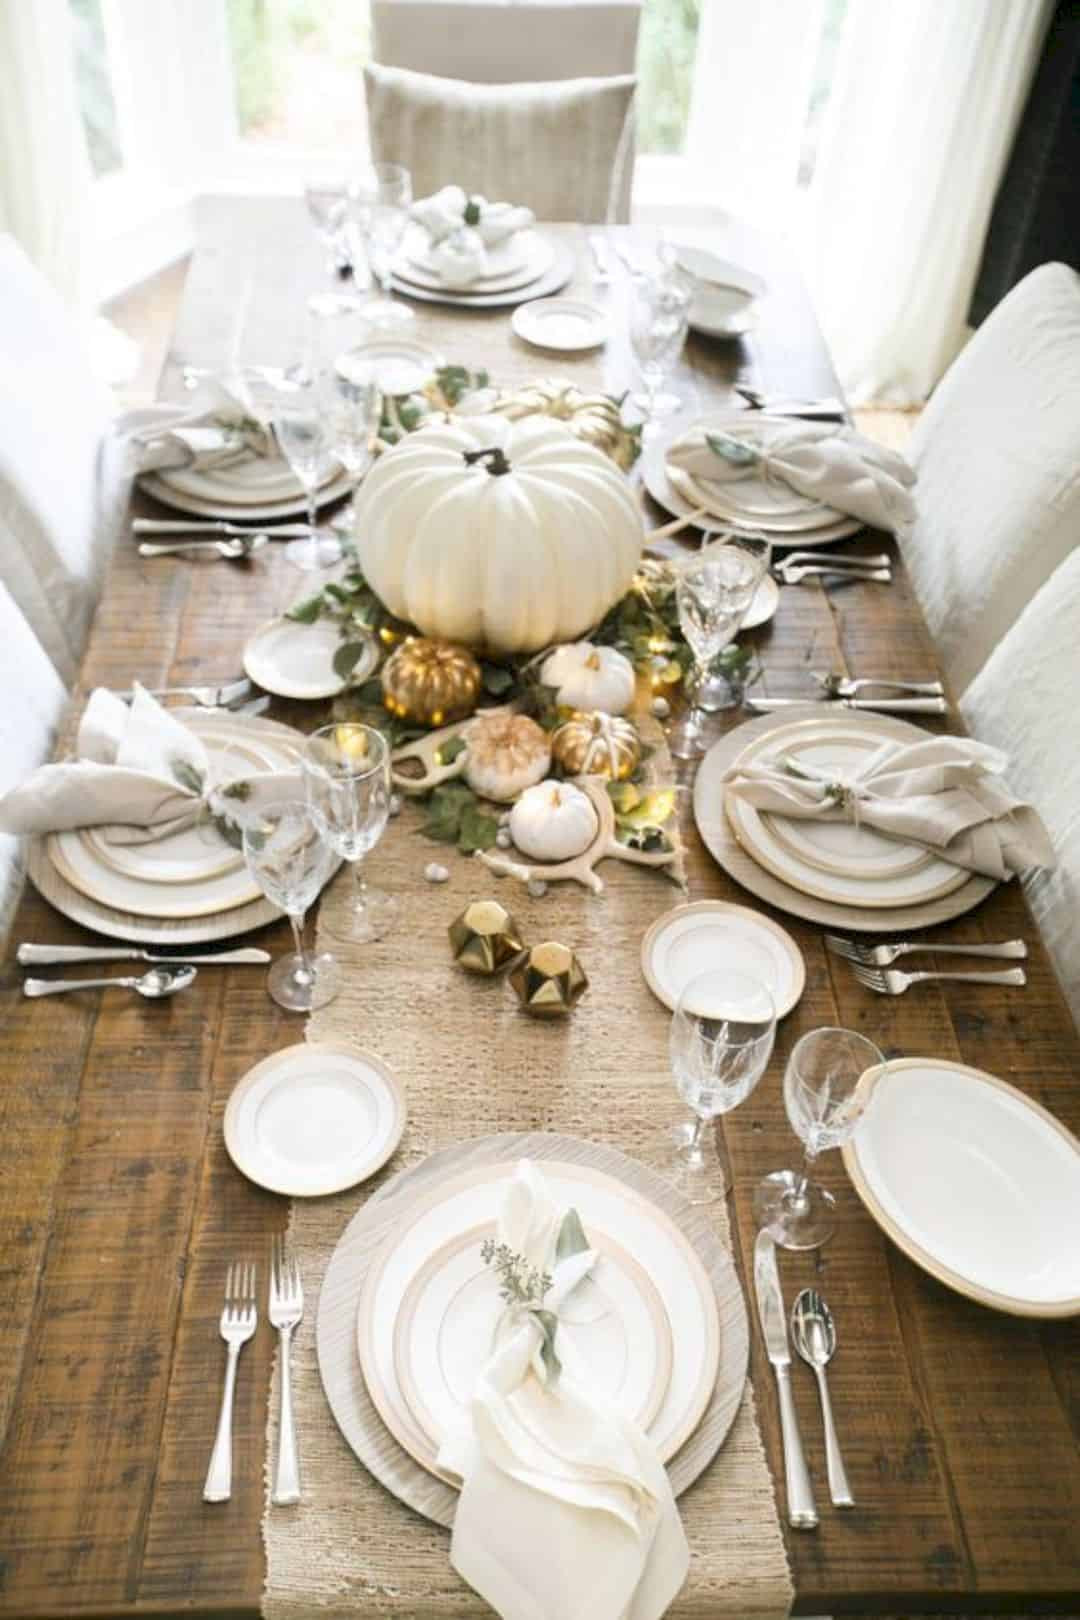 Pinterest Thanksgiving Table Ideas
 16 Magnificent Thanksgiving Table Decorating Ideas